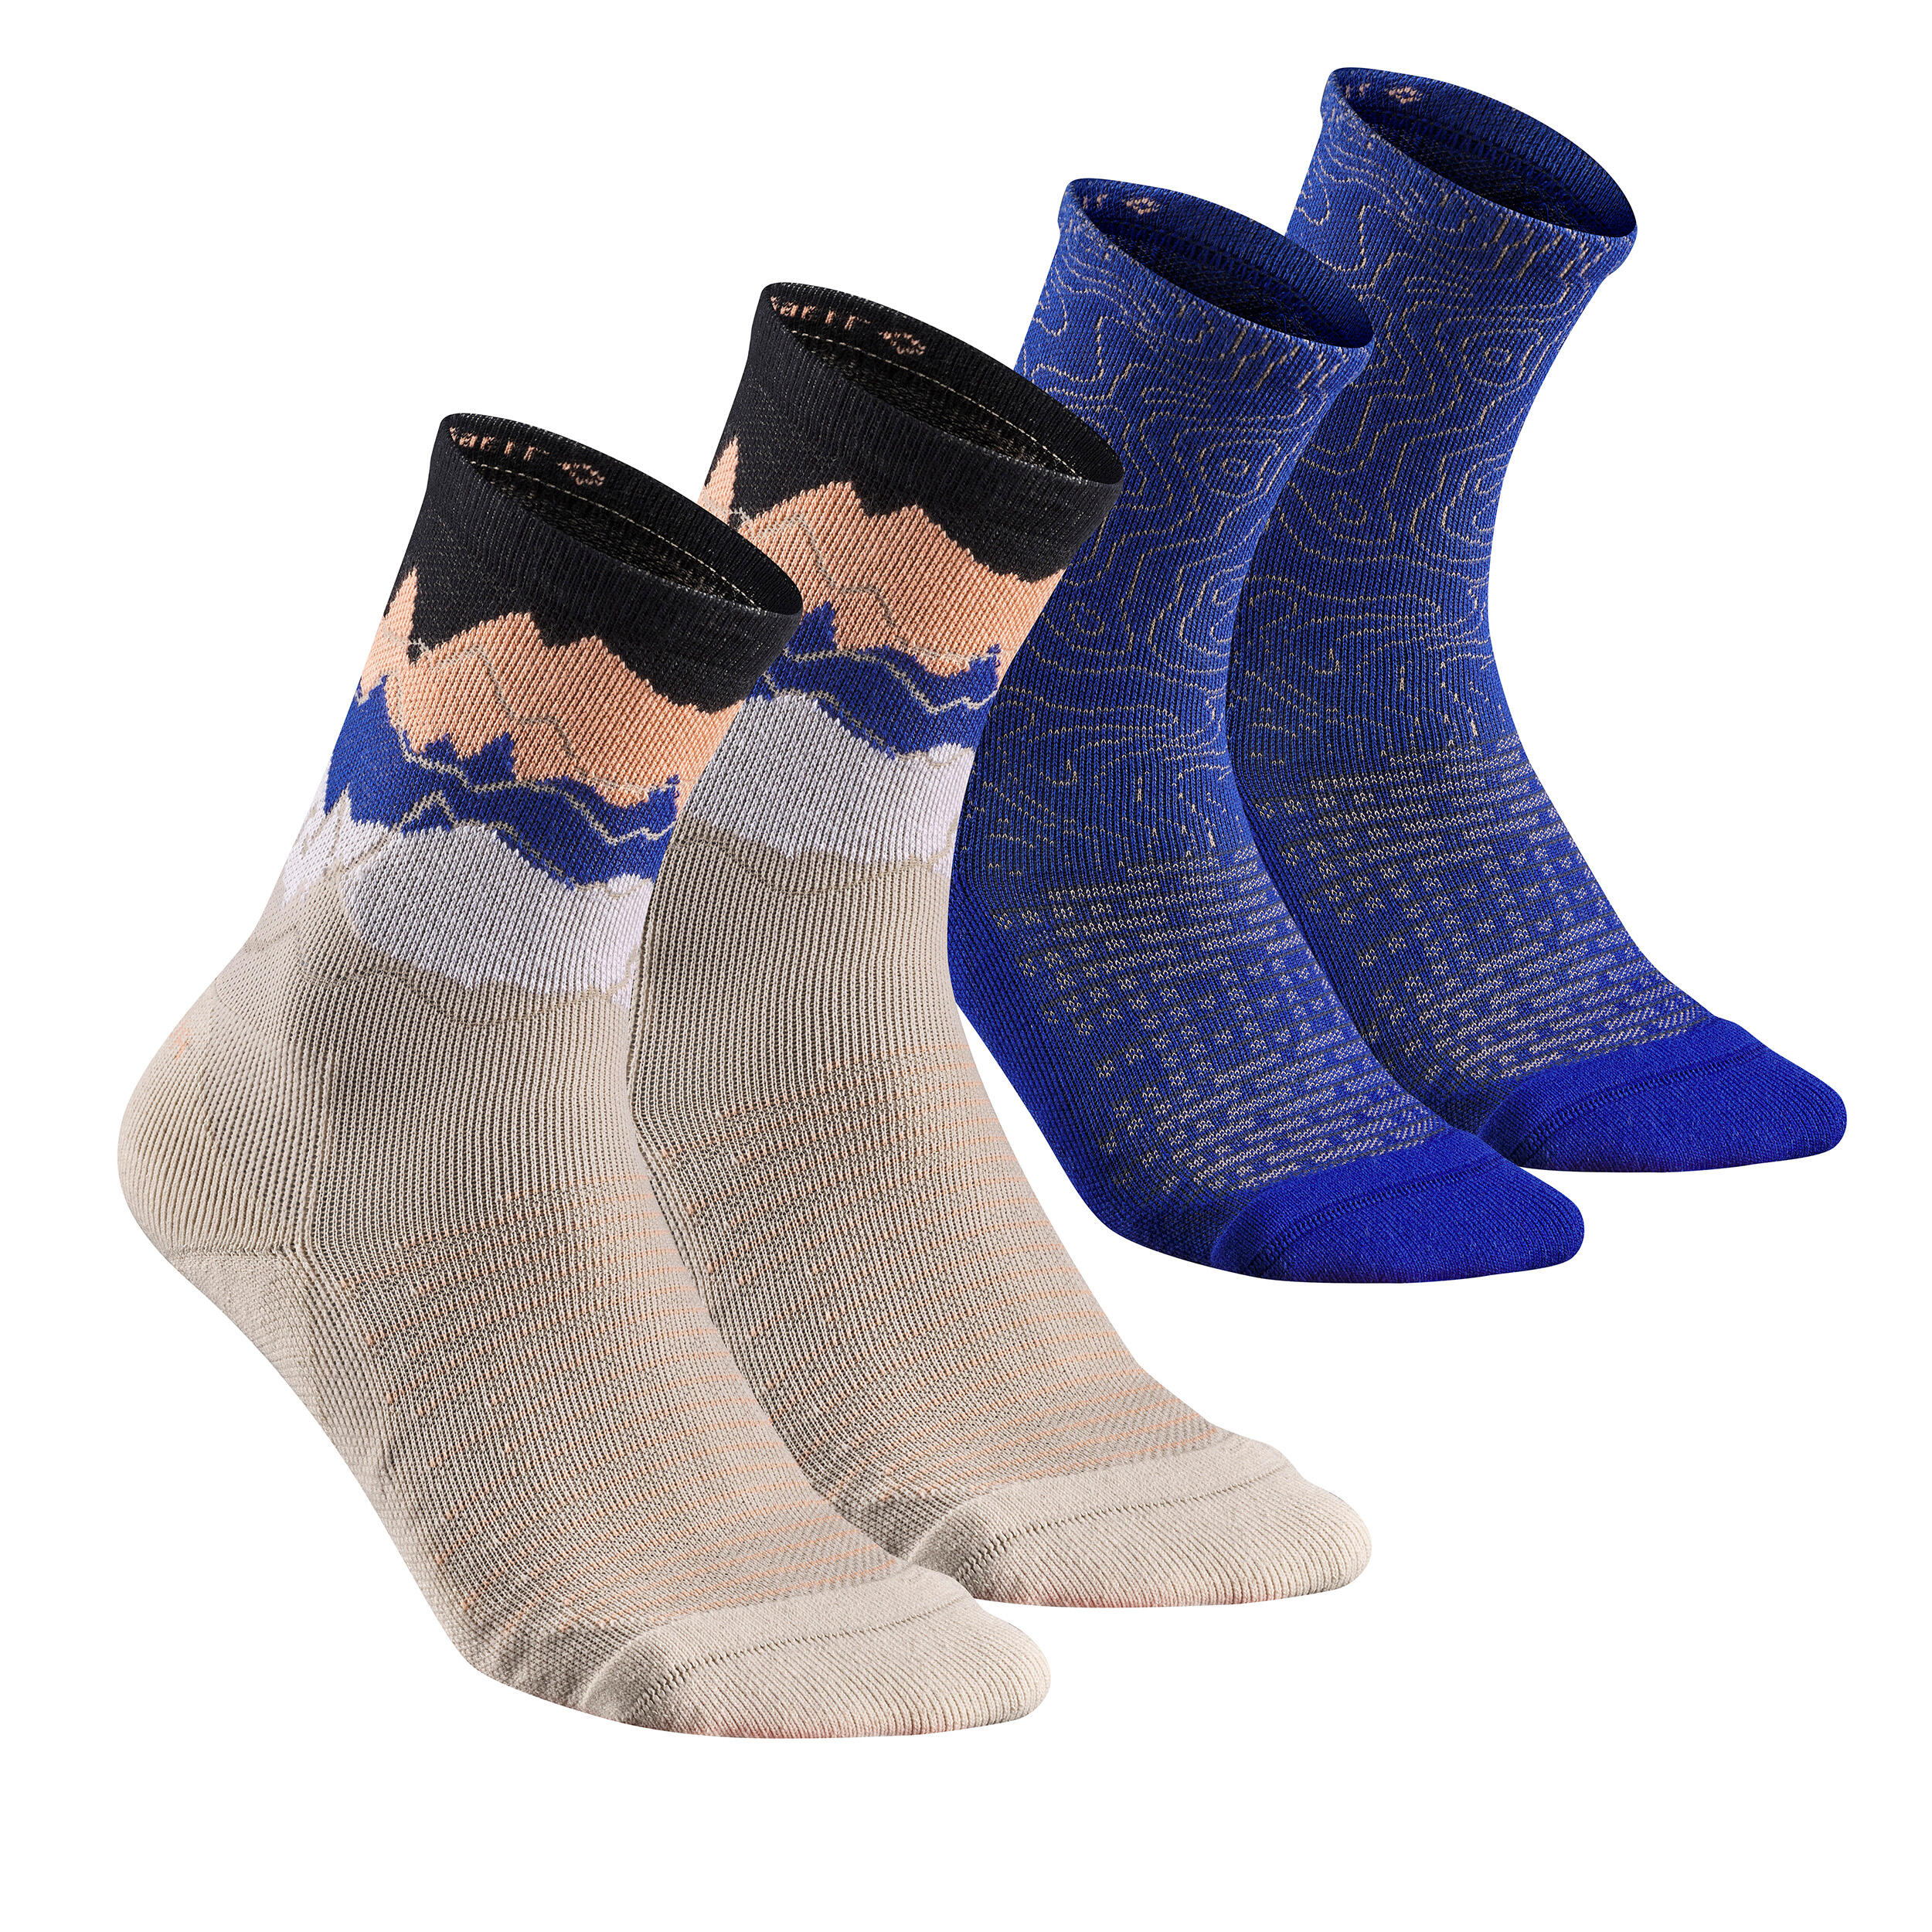 QUECHUA Sock Hike 100 High  - Limited Edition Pack of 2 Pairs - Blue